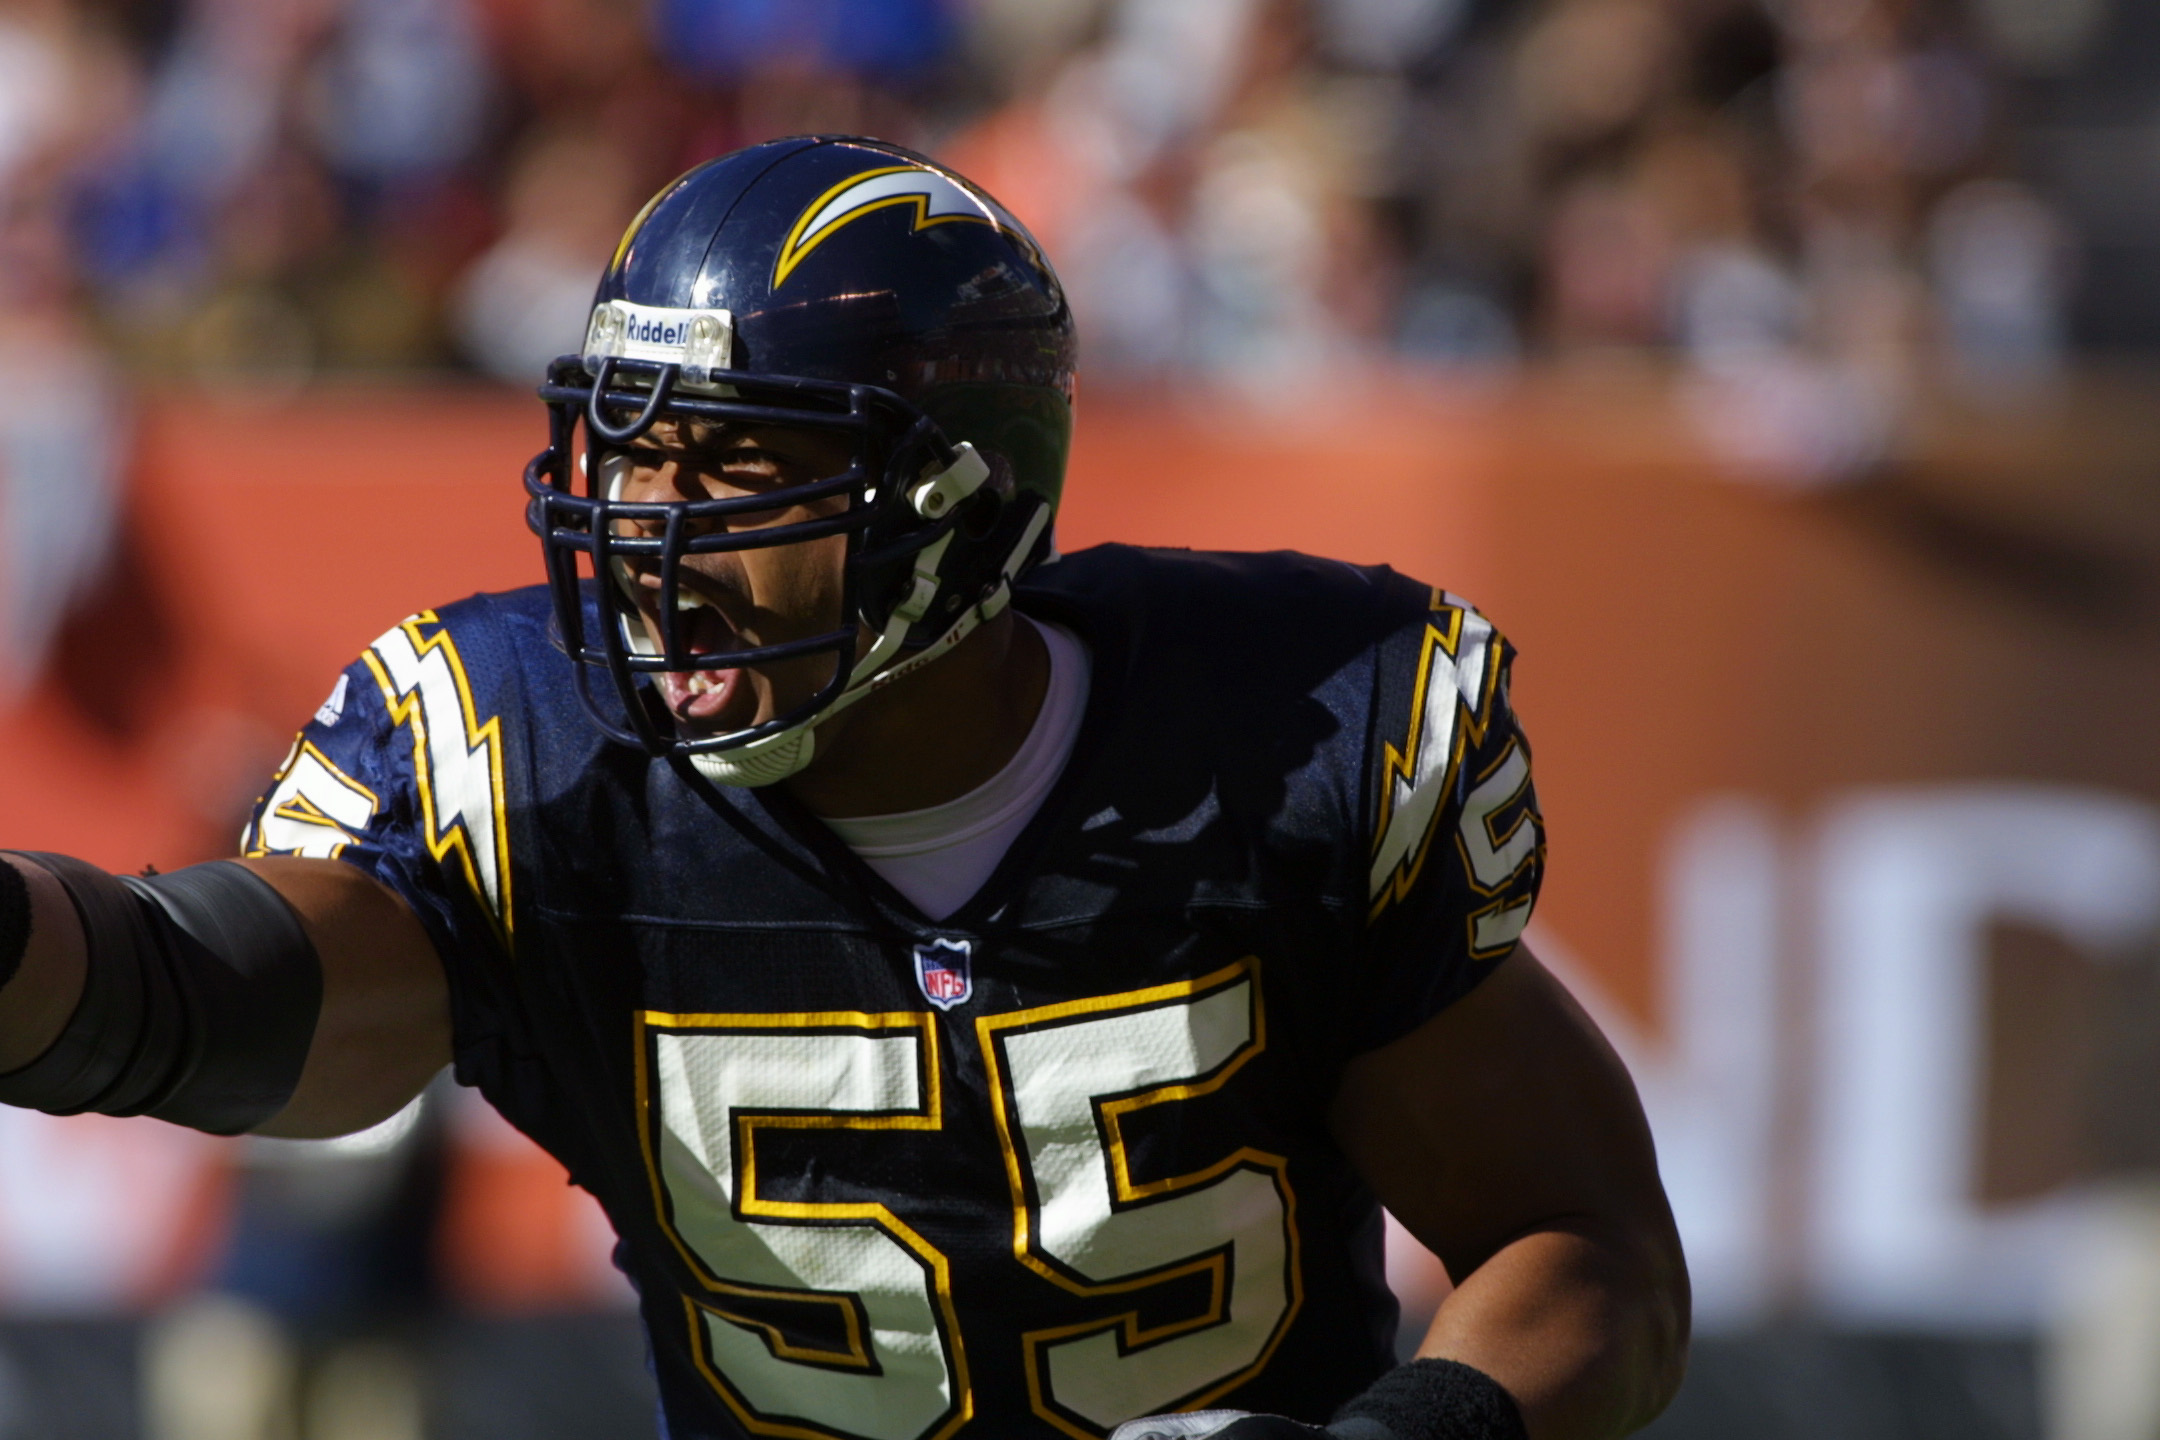 Junior Seau Was An Outstanding Linebacker For 20 Years